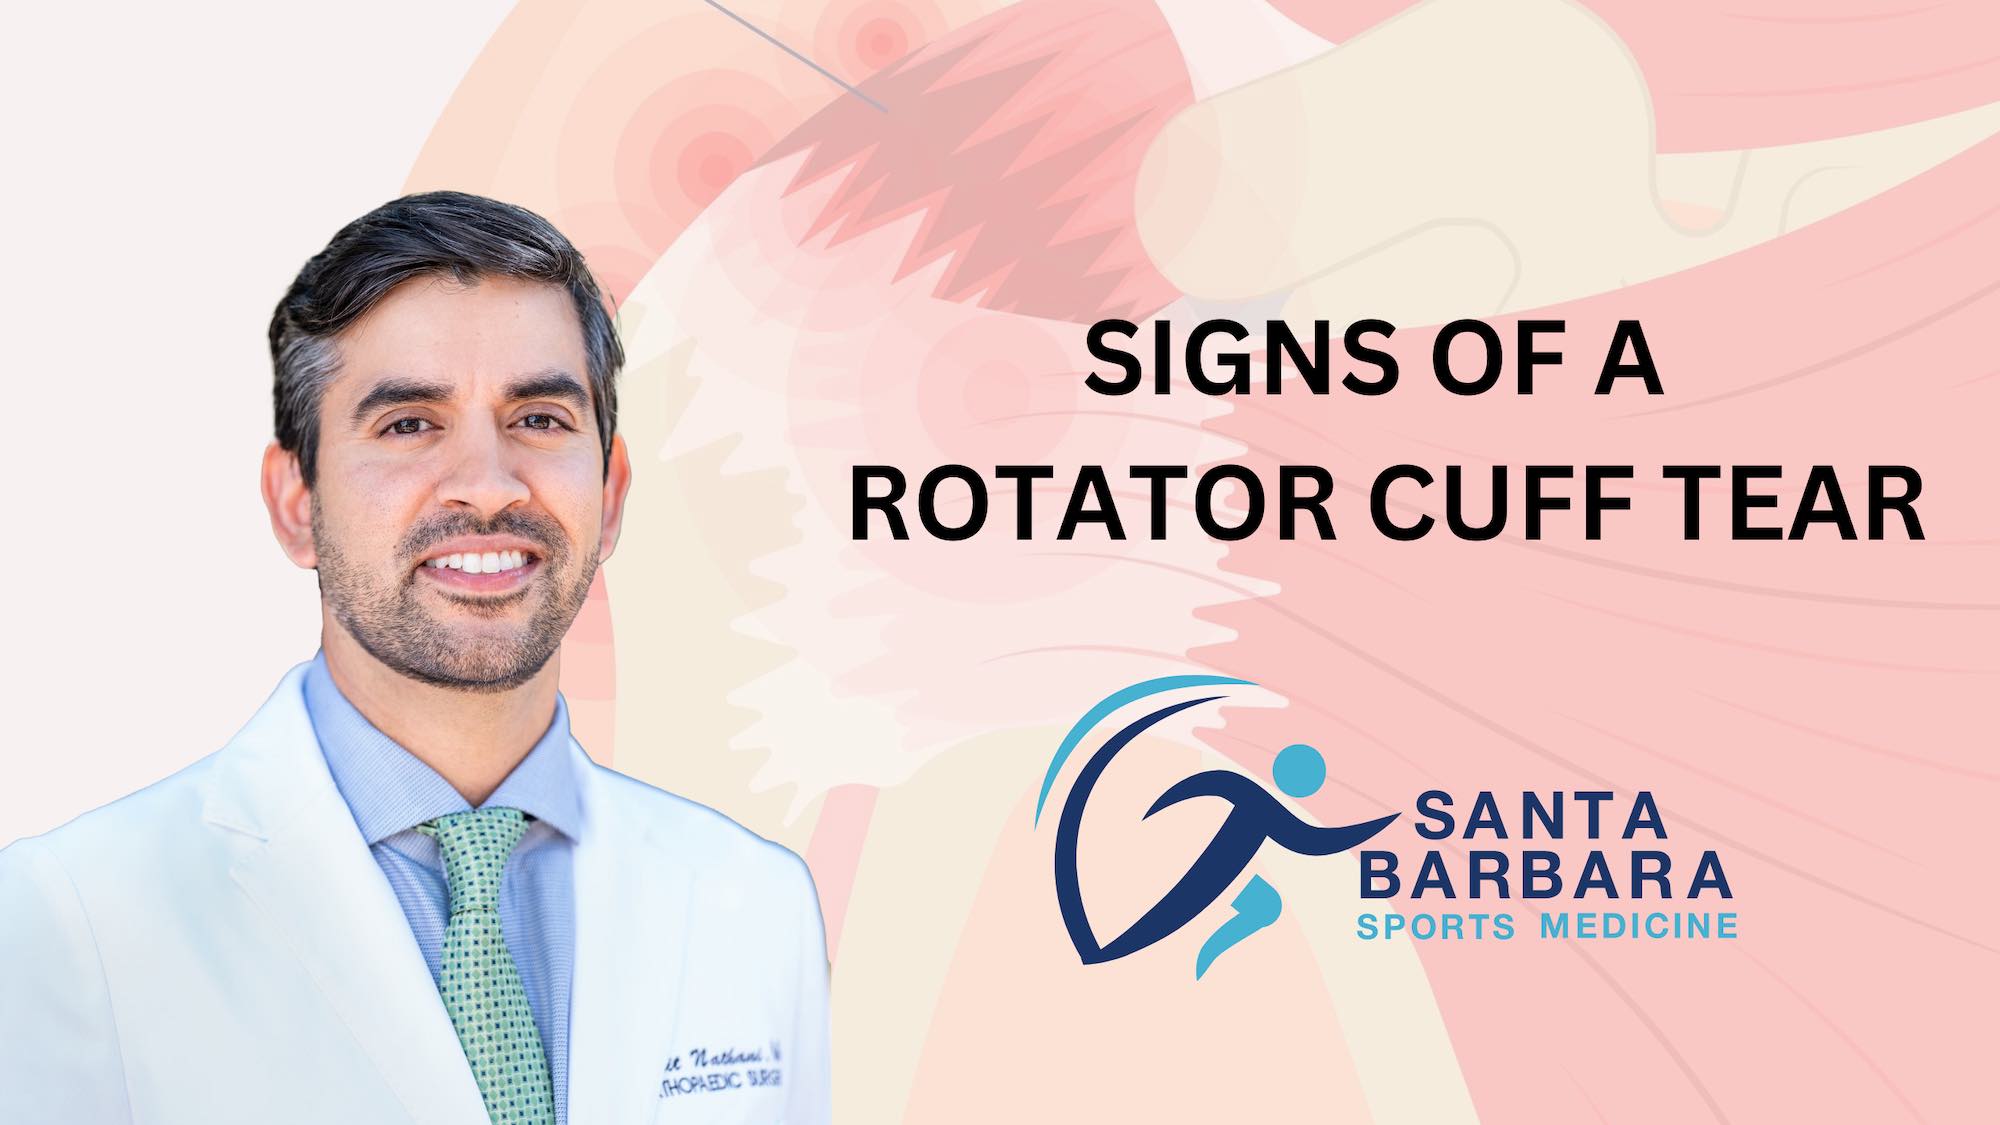 Video of Dr. Nathani on signs of a rotator cuff tear